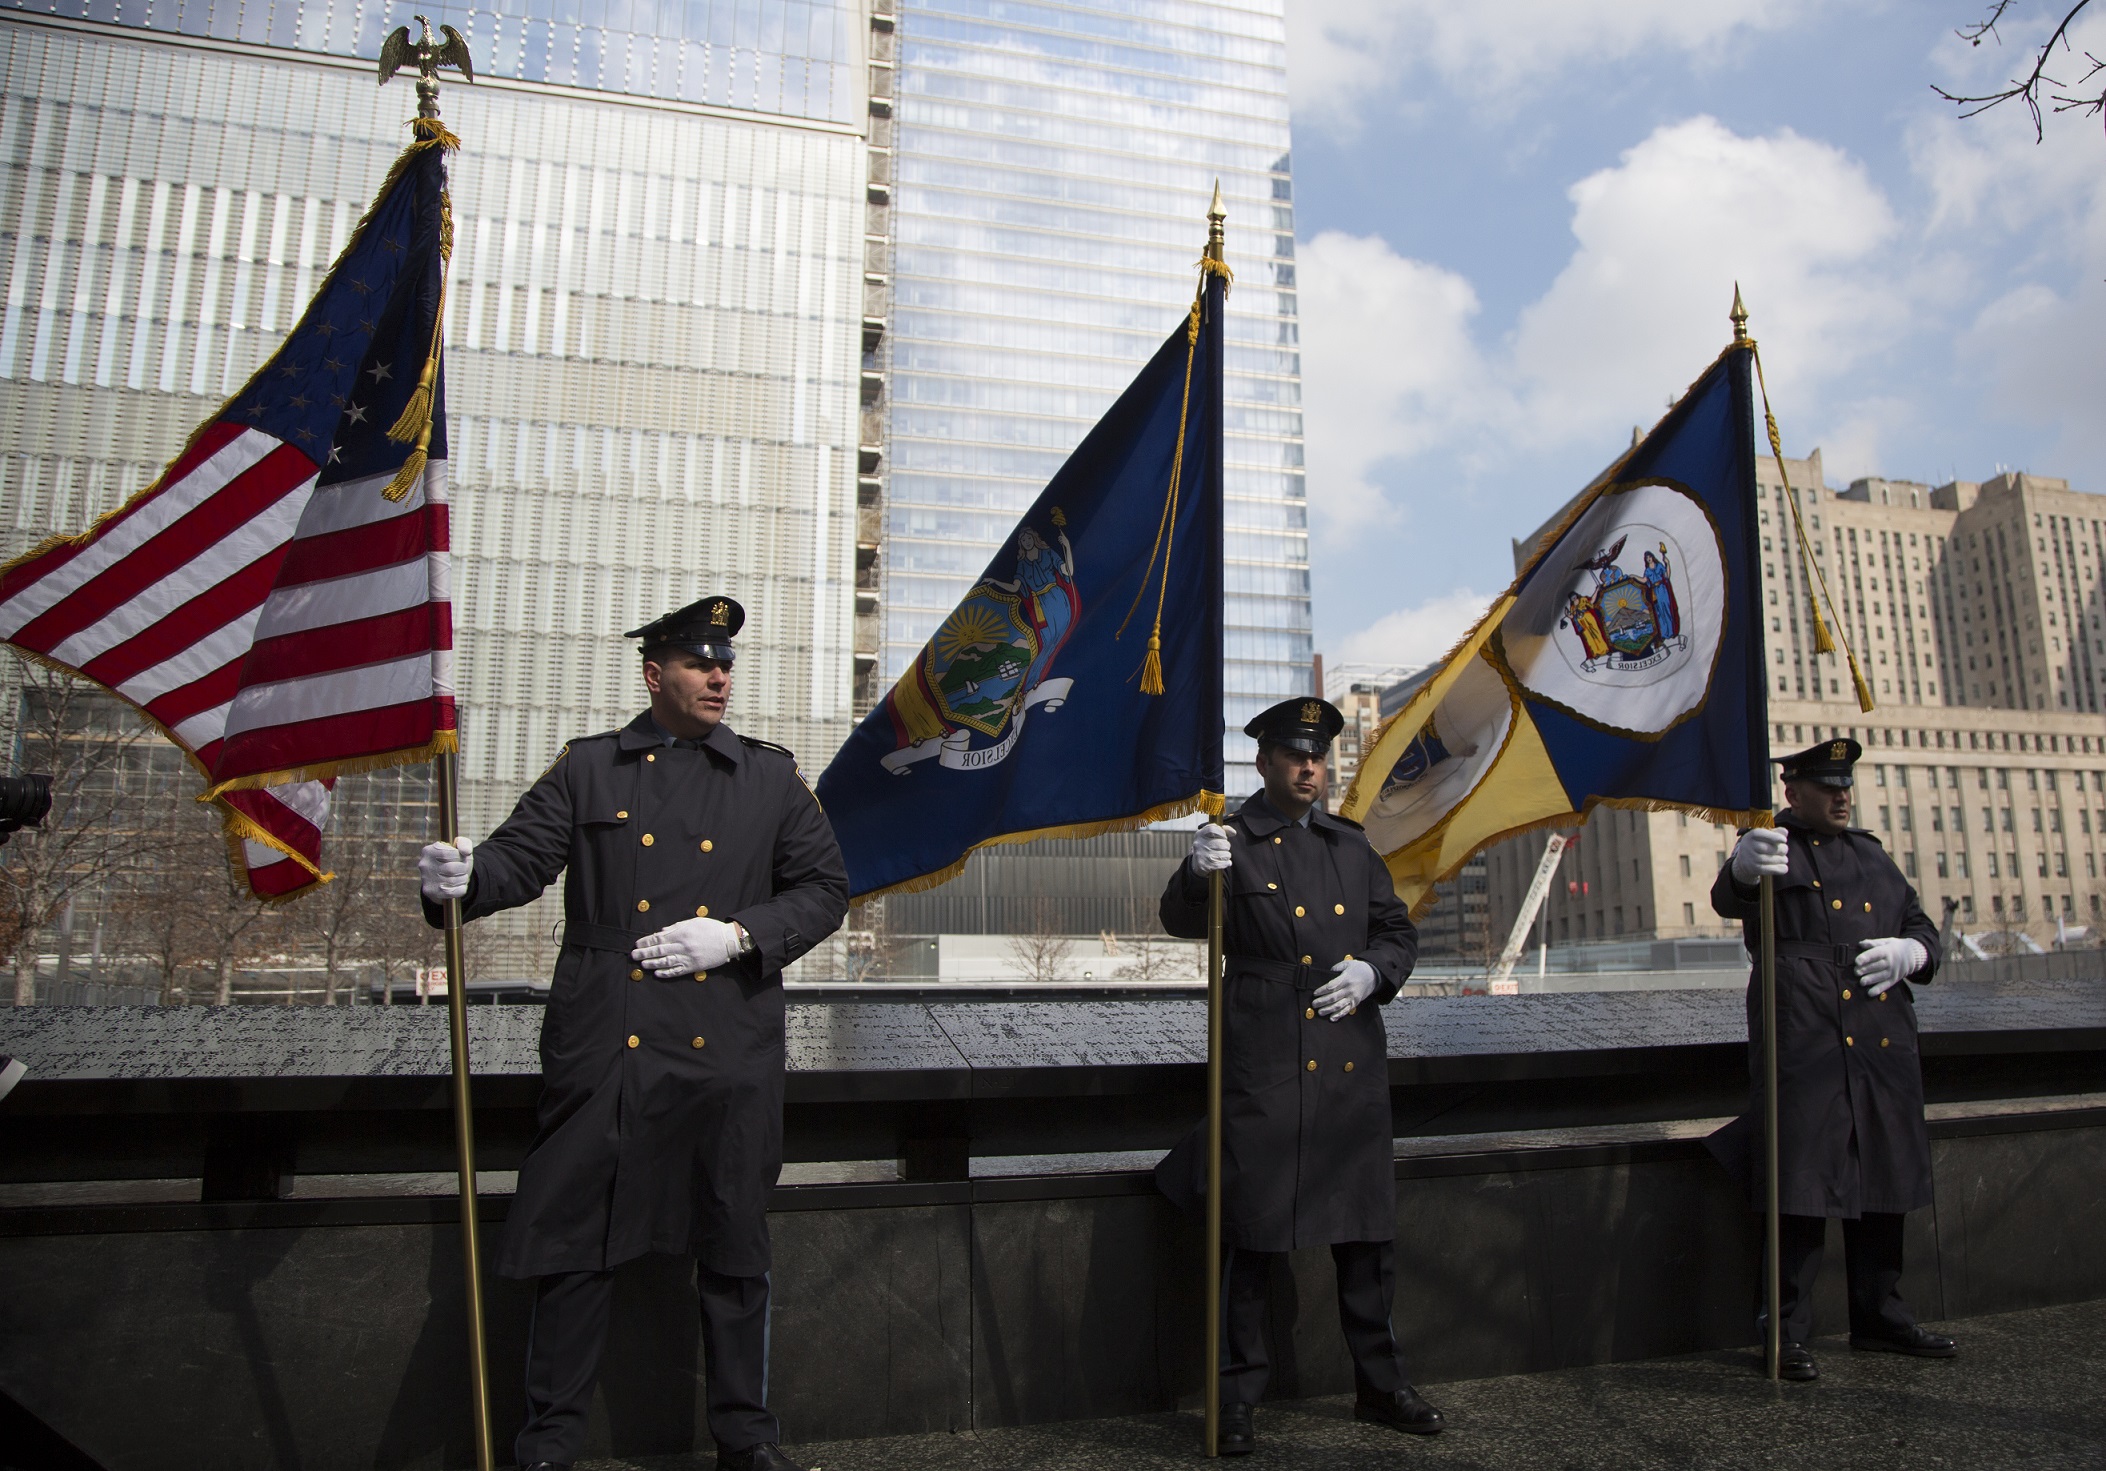 Three police officers in formal uniforms hold large flags, including an American flag and a New York State flag, as they stand beside a reflecting pool on Memorial plaza.